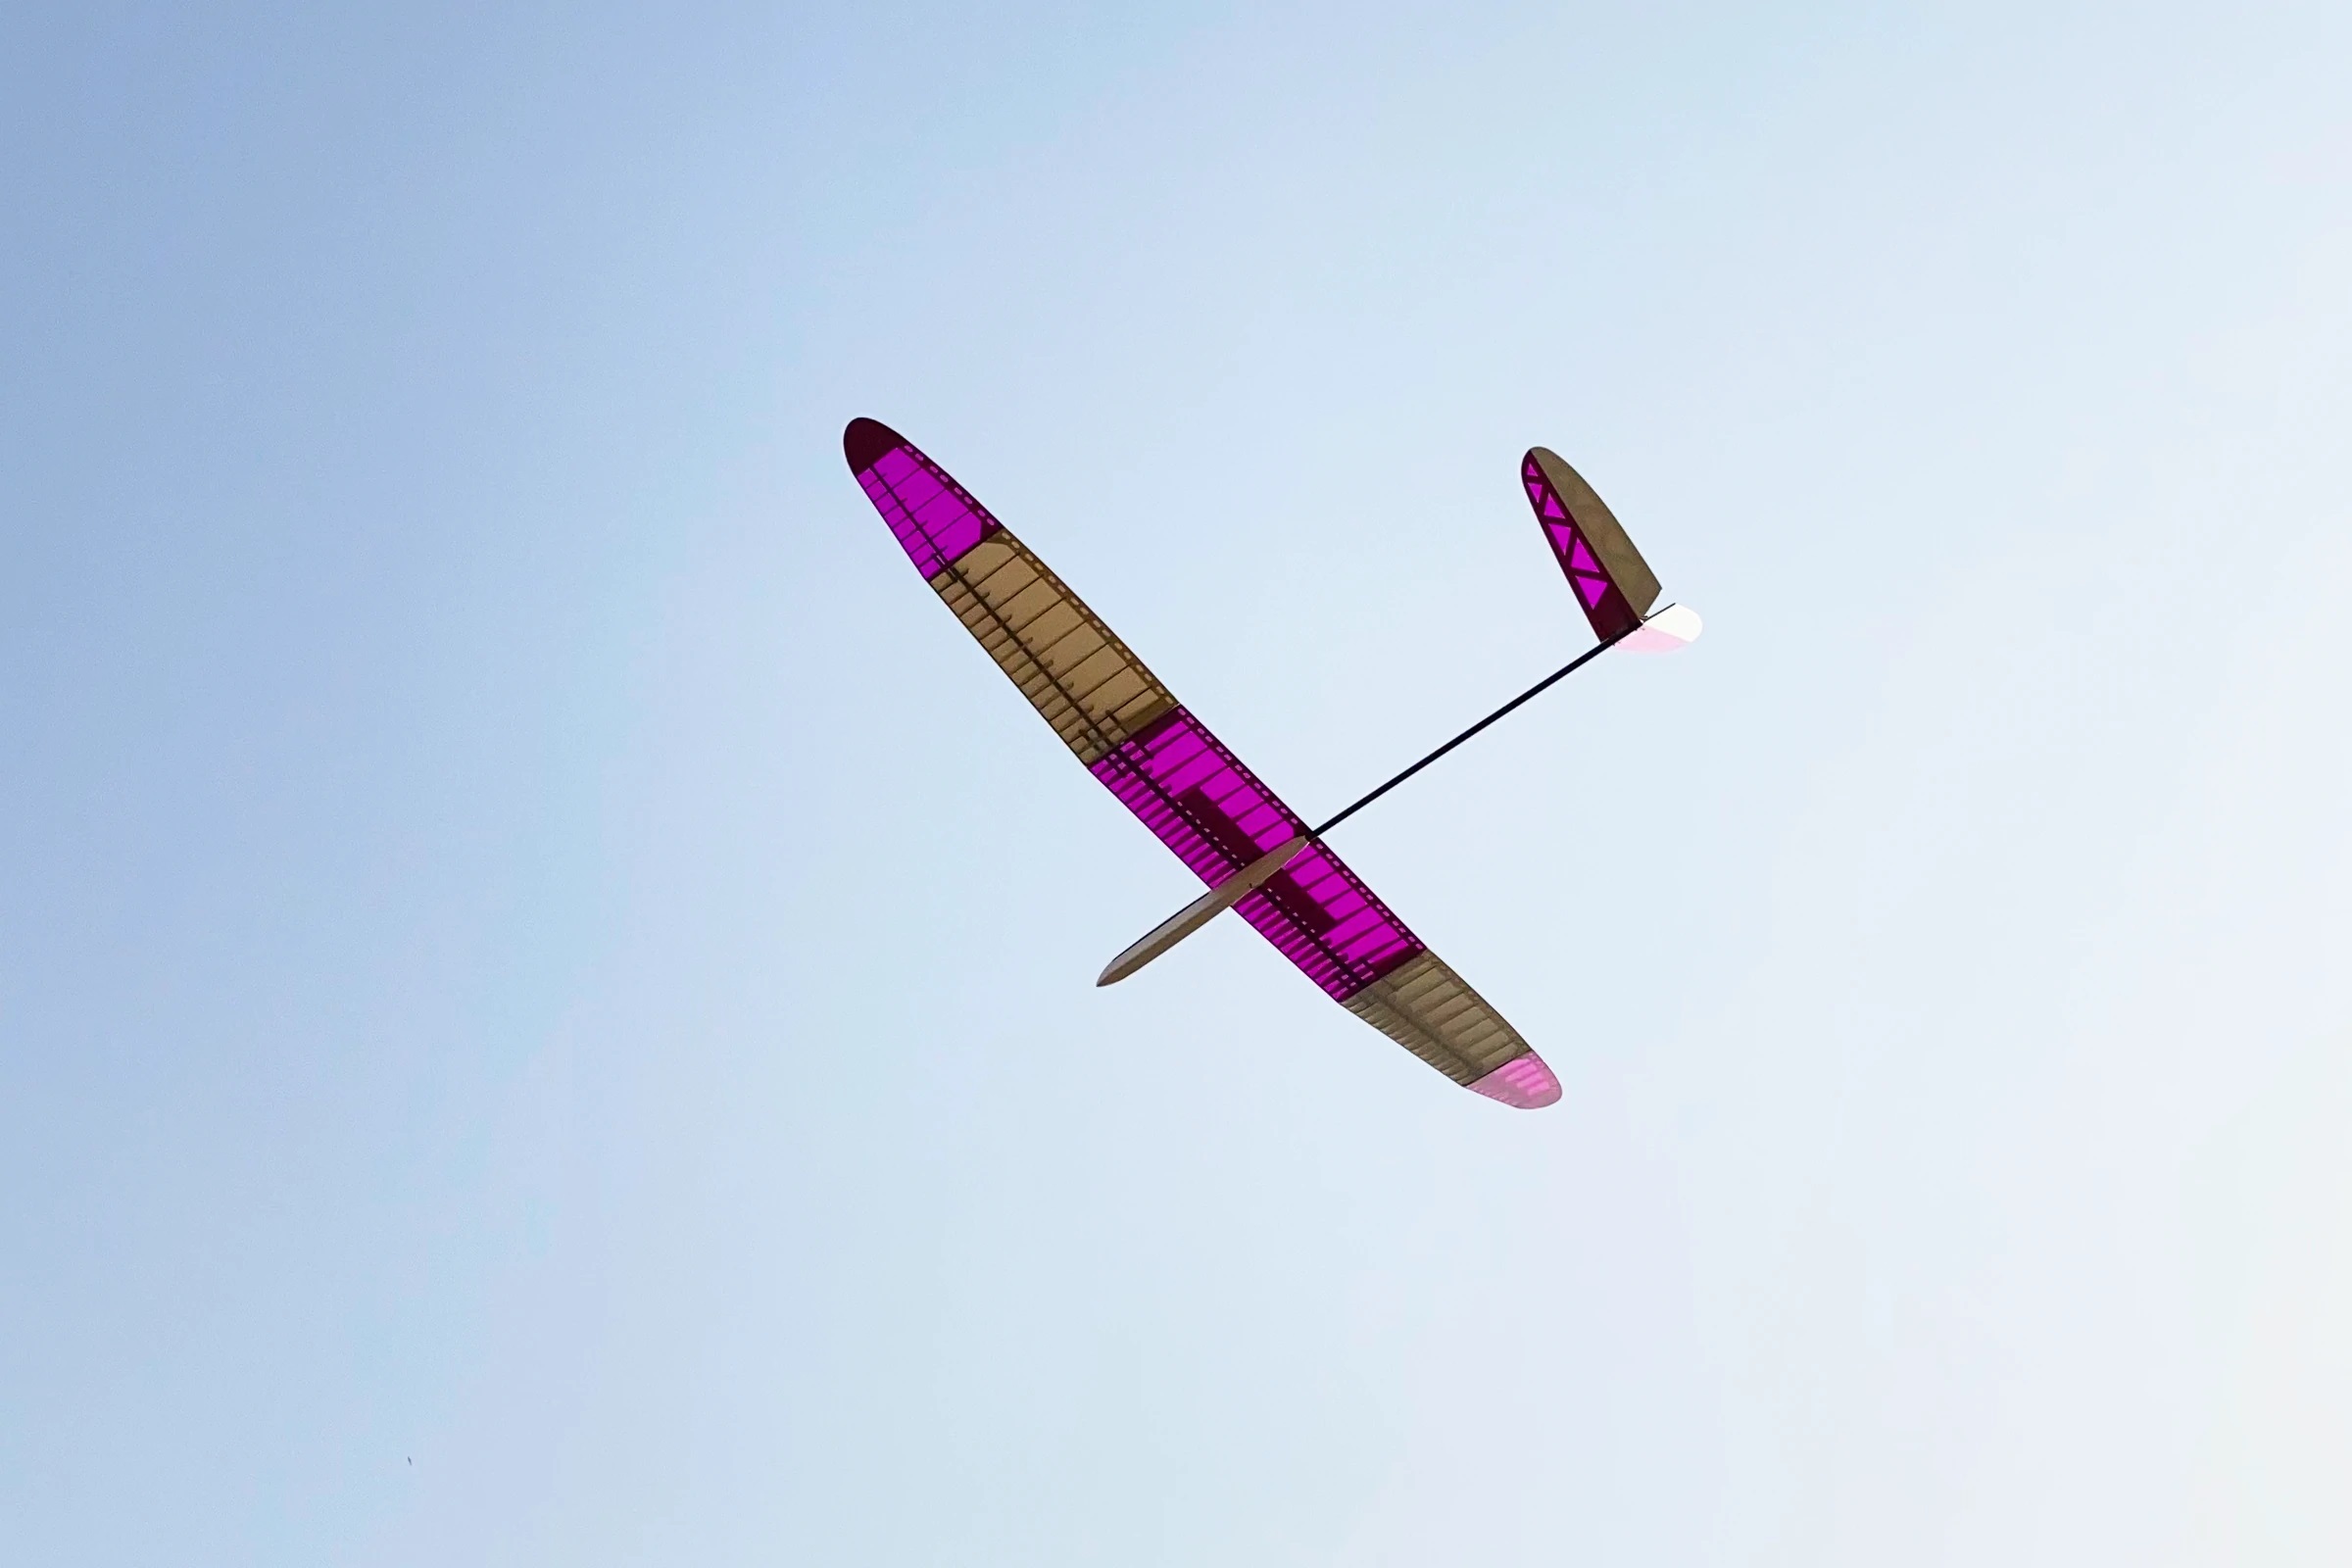 medina-kit-2m-res-build-as-pure-glider-or-electric-version